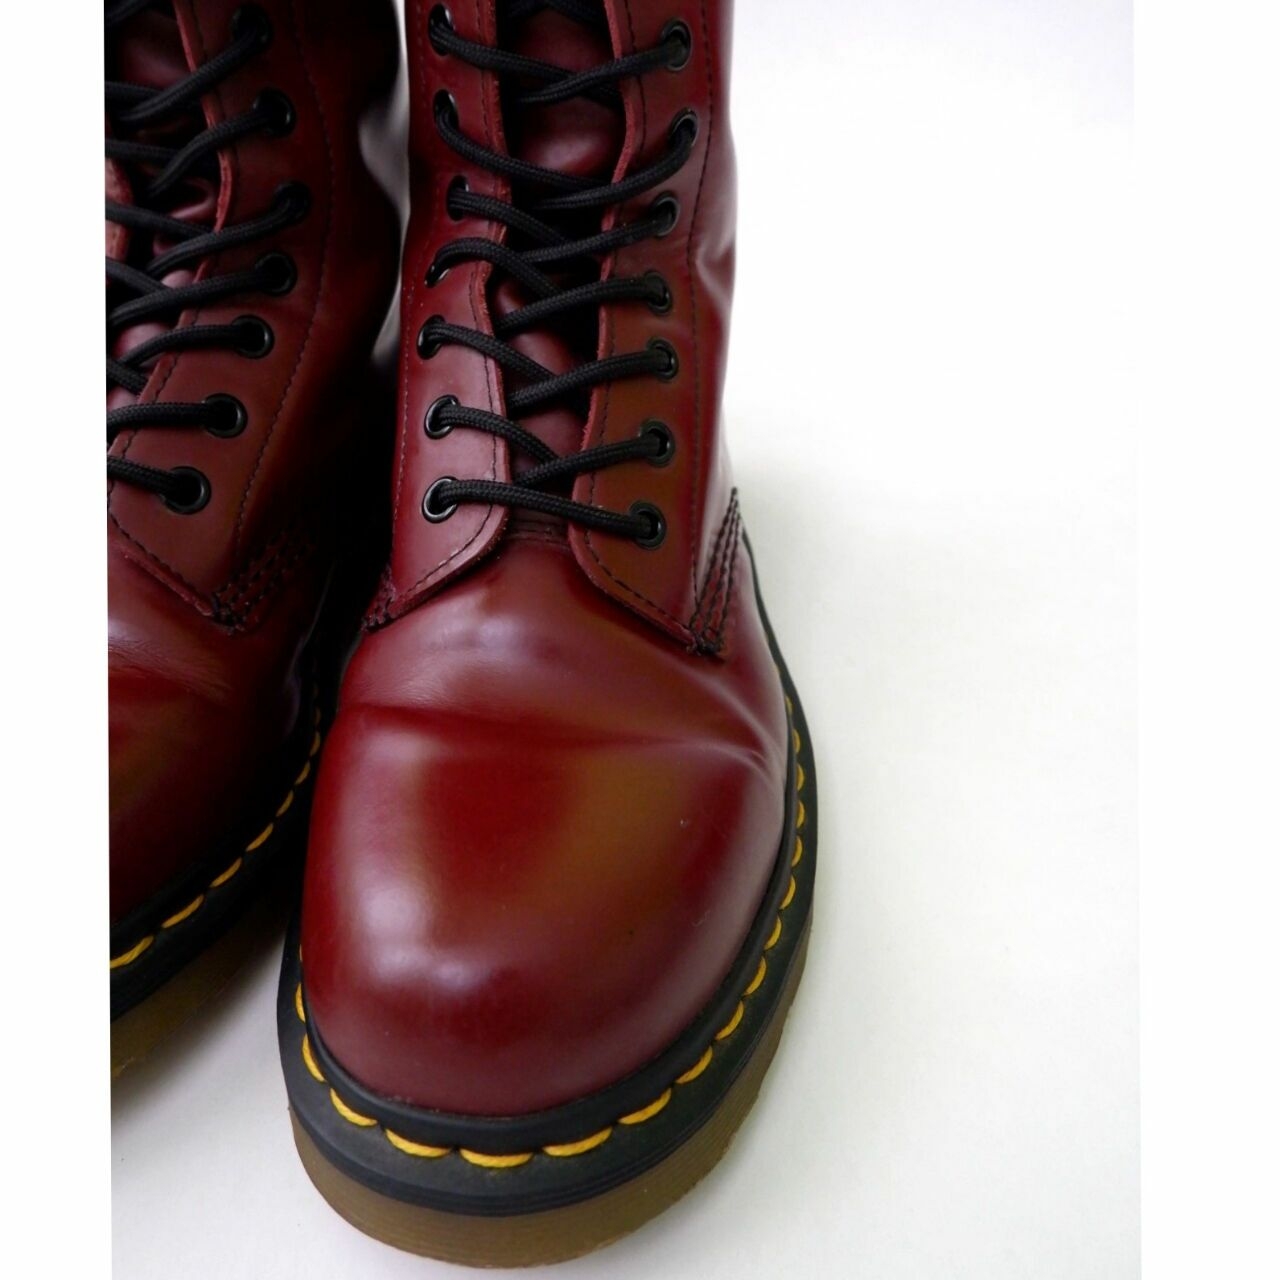 Dr. Martens Red Plaid Boots